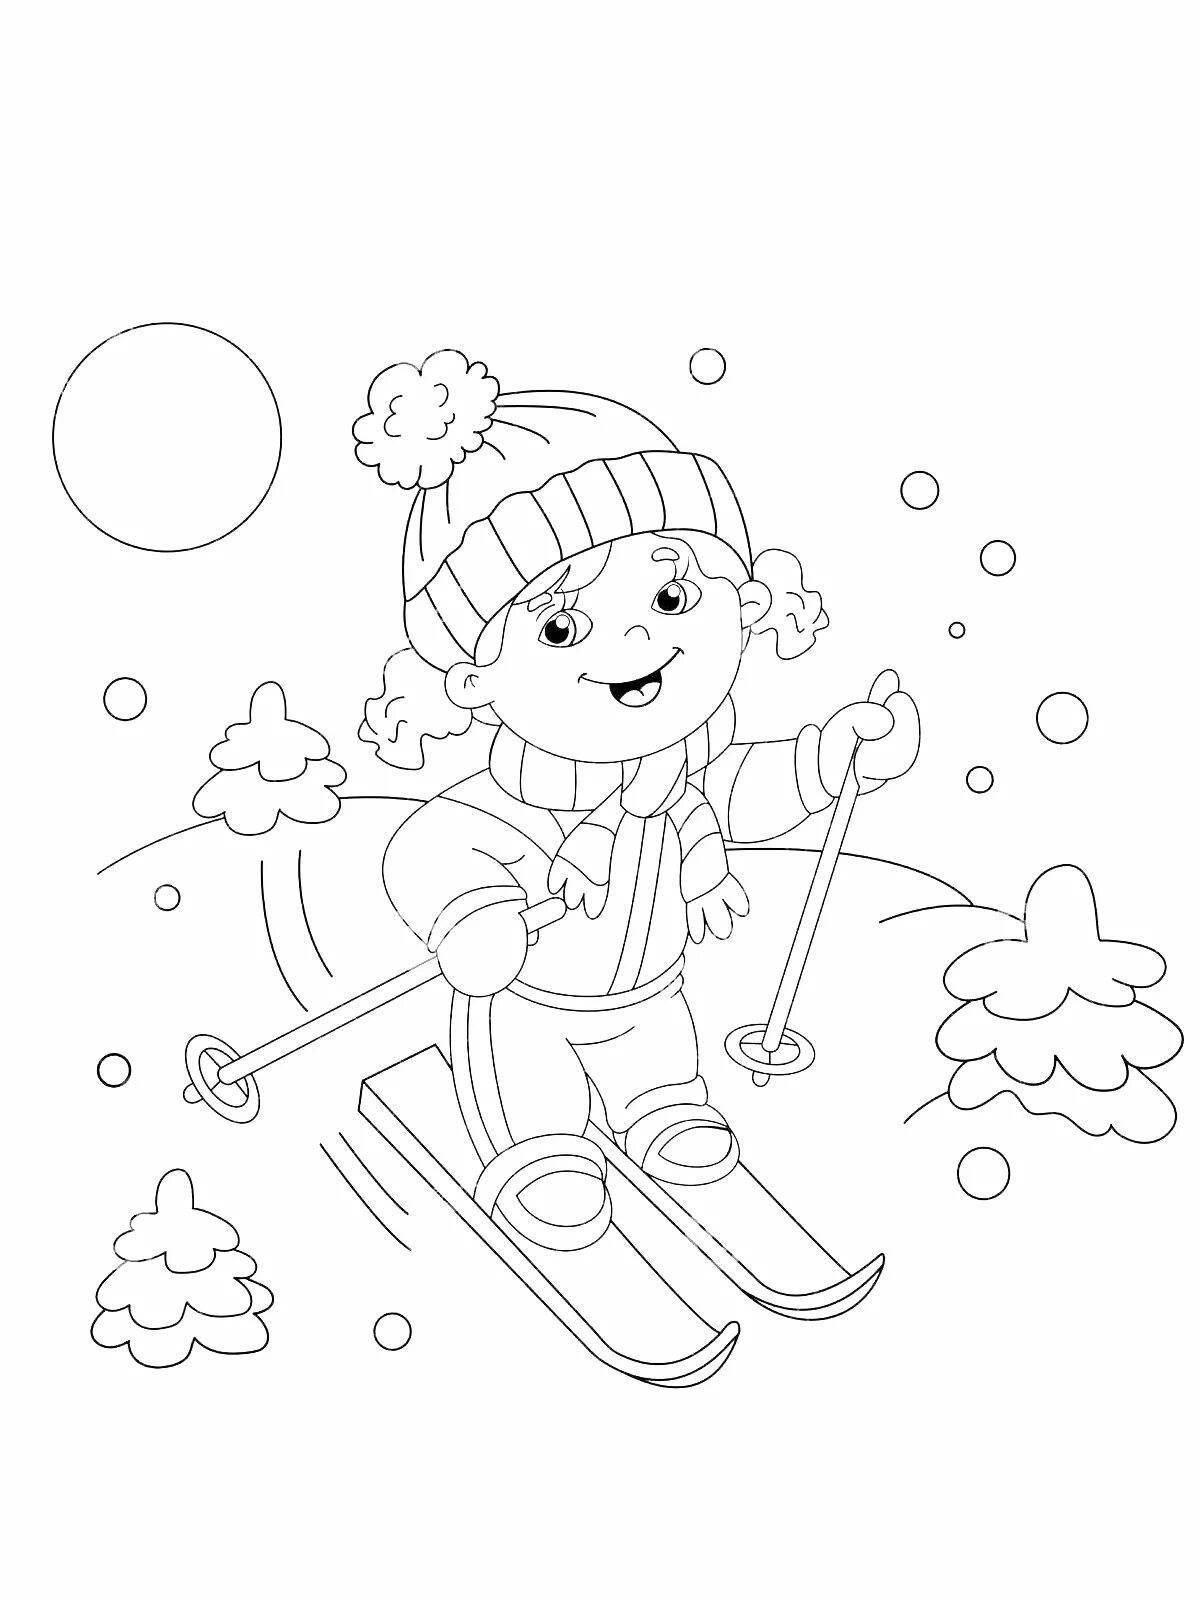 Exciting coloring of a boy on skis